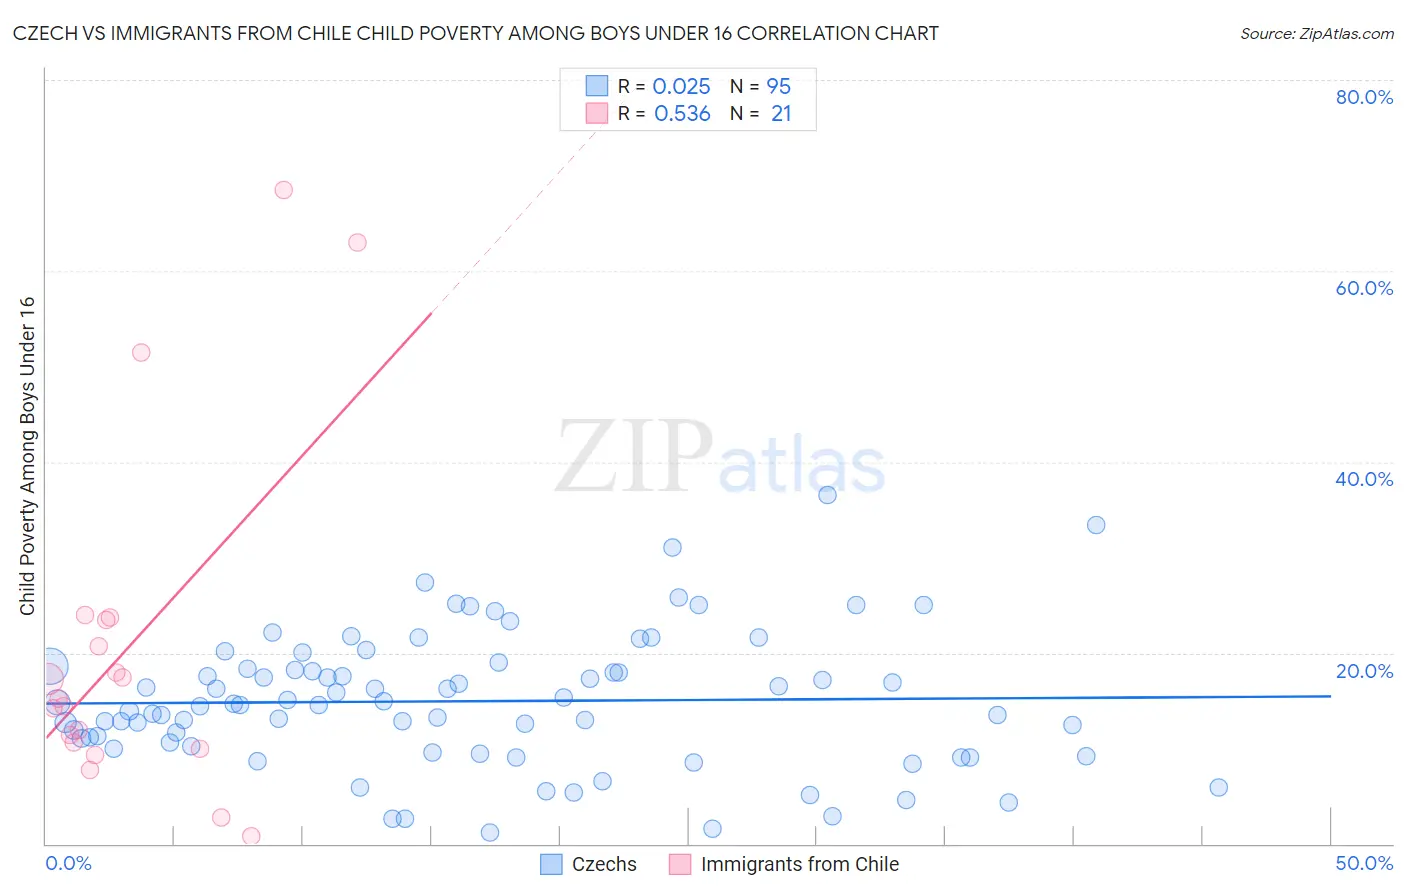 Czech vs Immigrants from Chile Child Poverty Among Boys Under 16